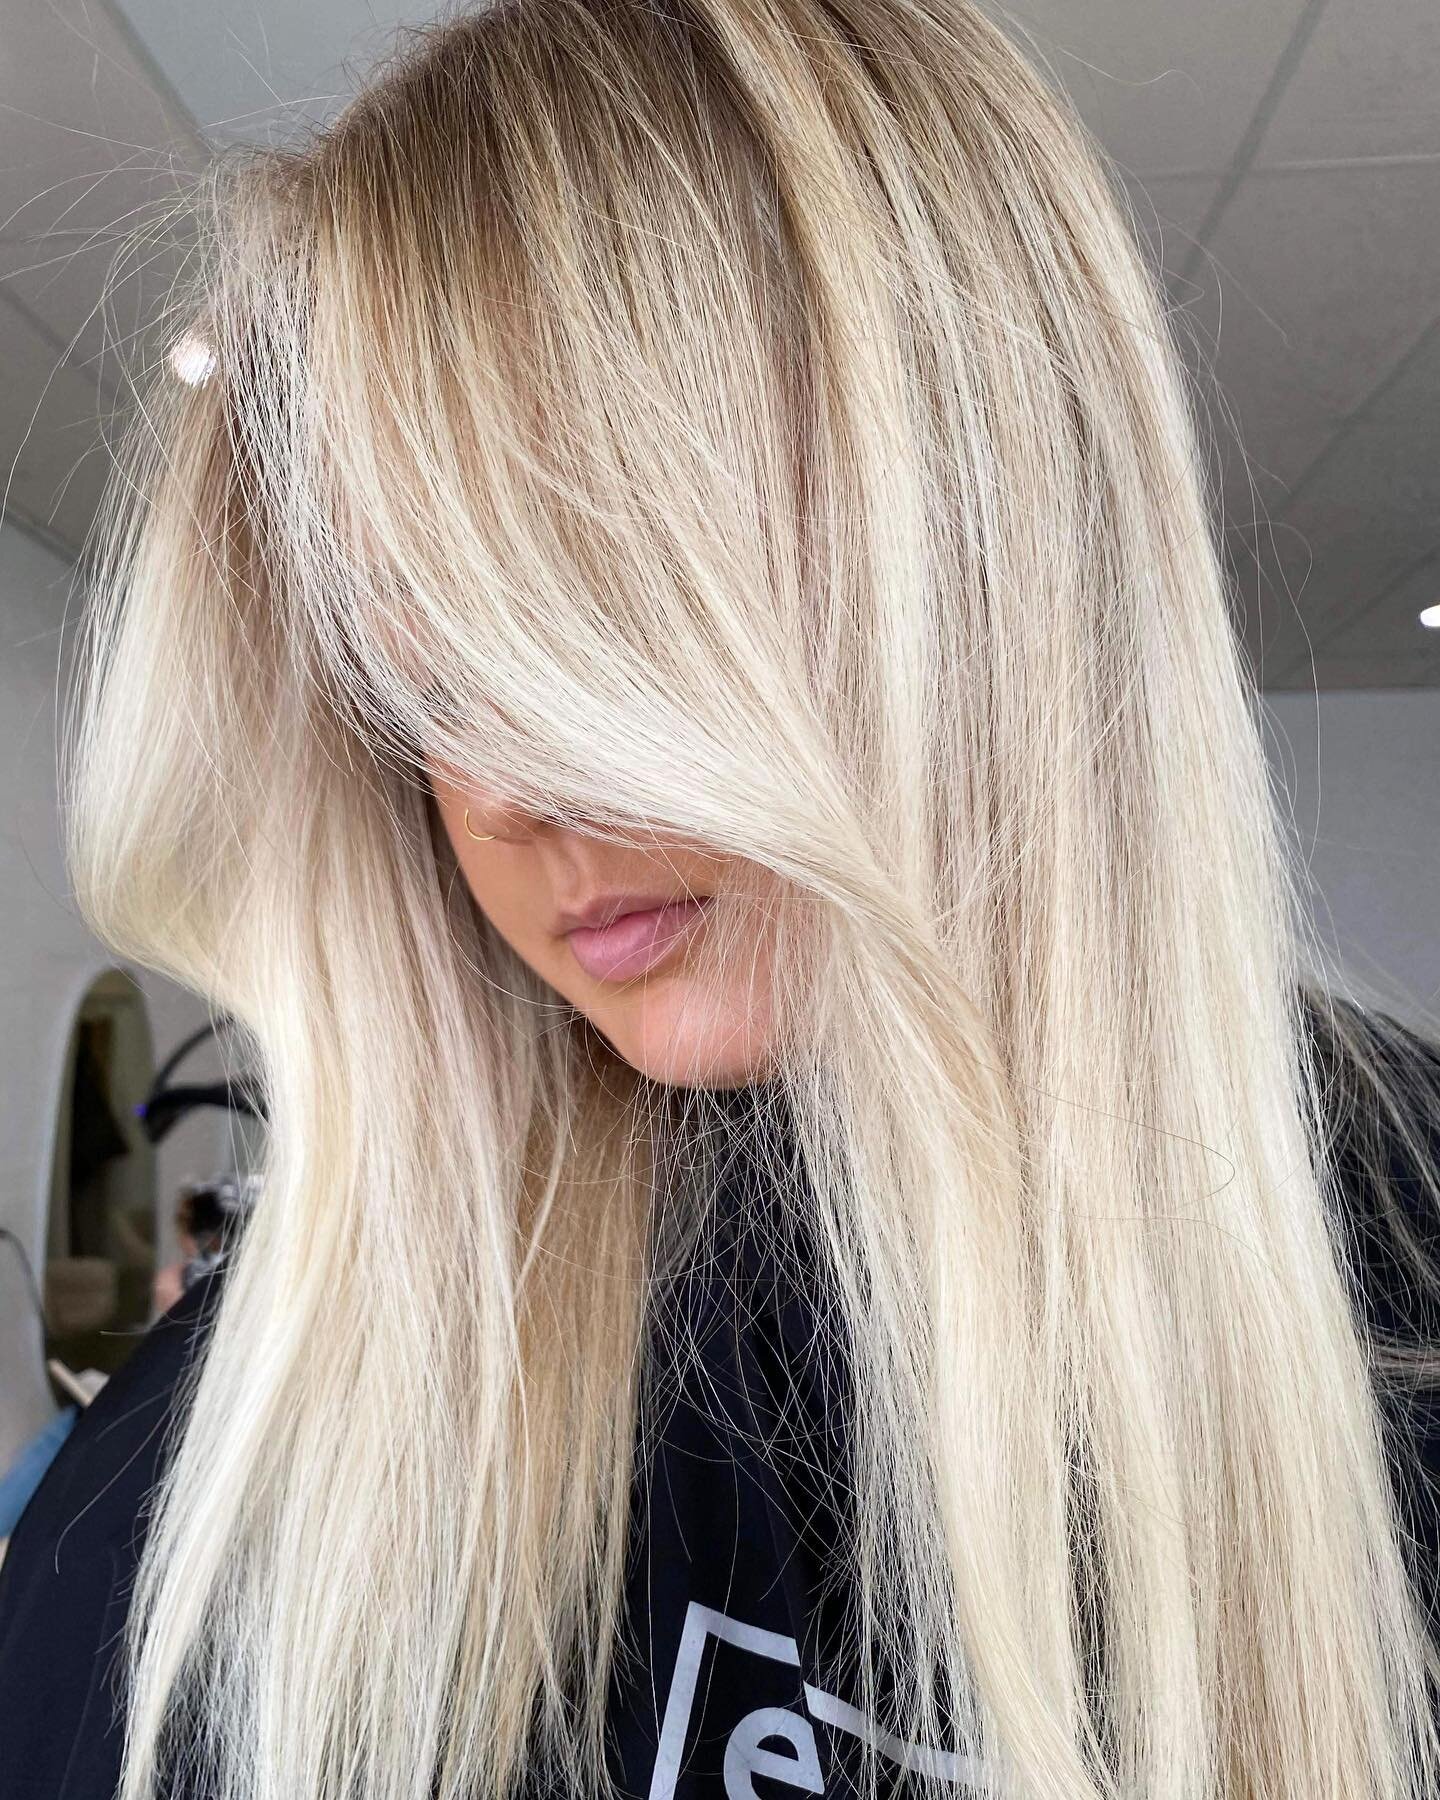 Obsessed with high impact blonde with lived in roots 🙌🏻 Stylist: Sally 
.
.
.
#blonde #highimpactblonde #scandiblonde